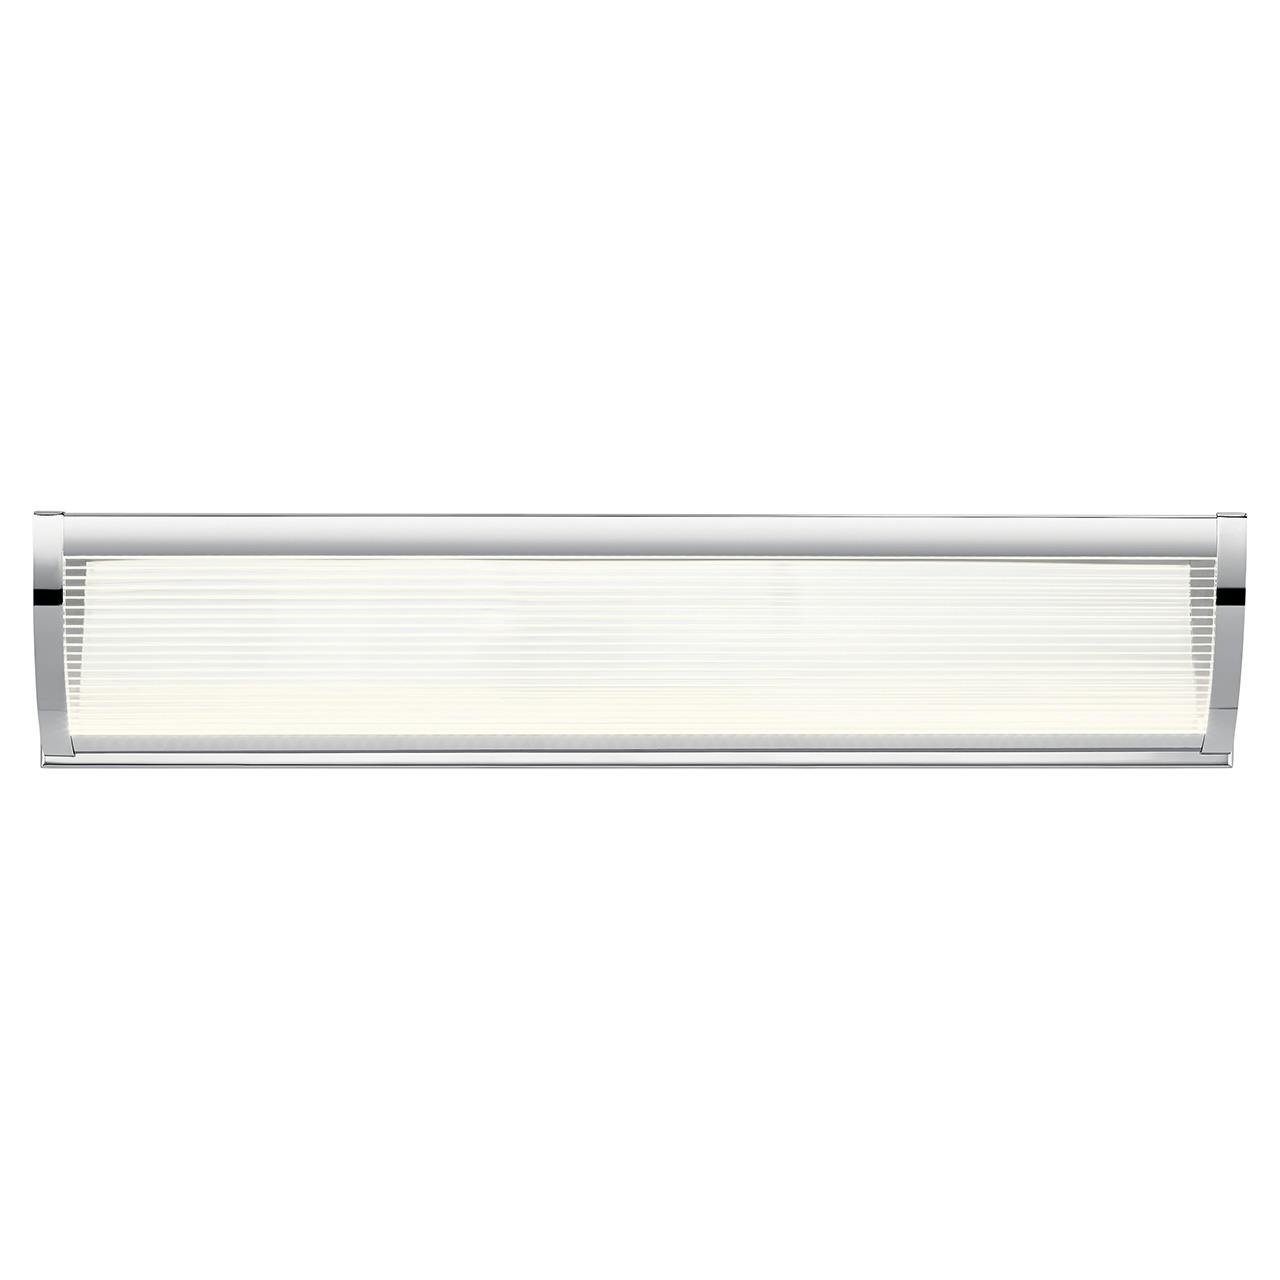 Front view of the Roone 3000K 24" Linear Bath Light Chrome on a white background